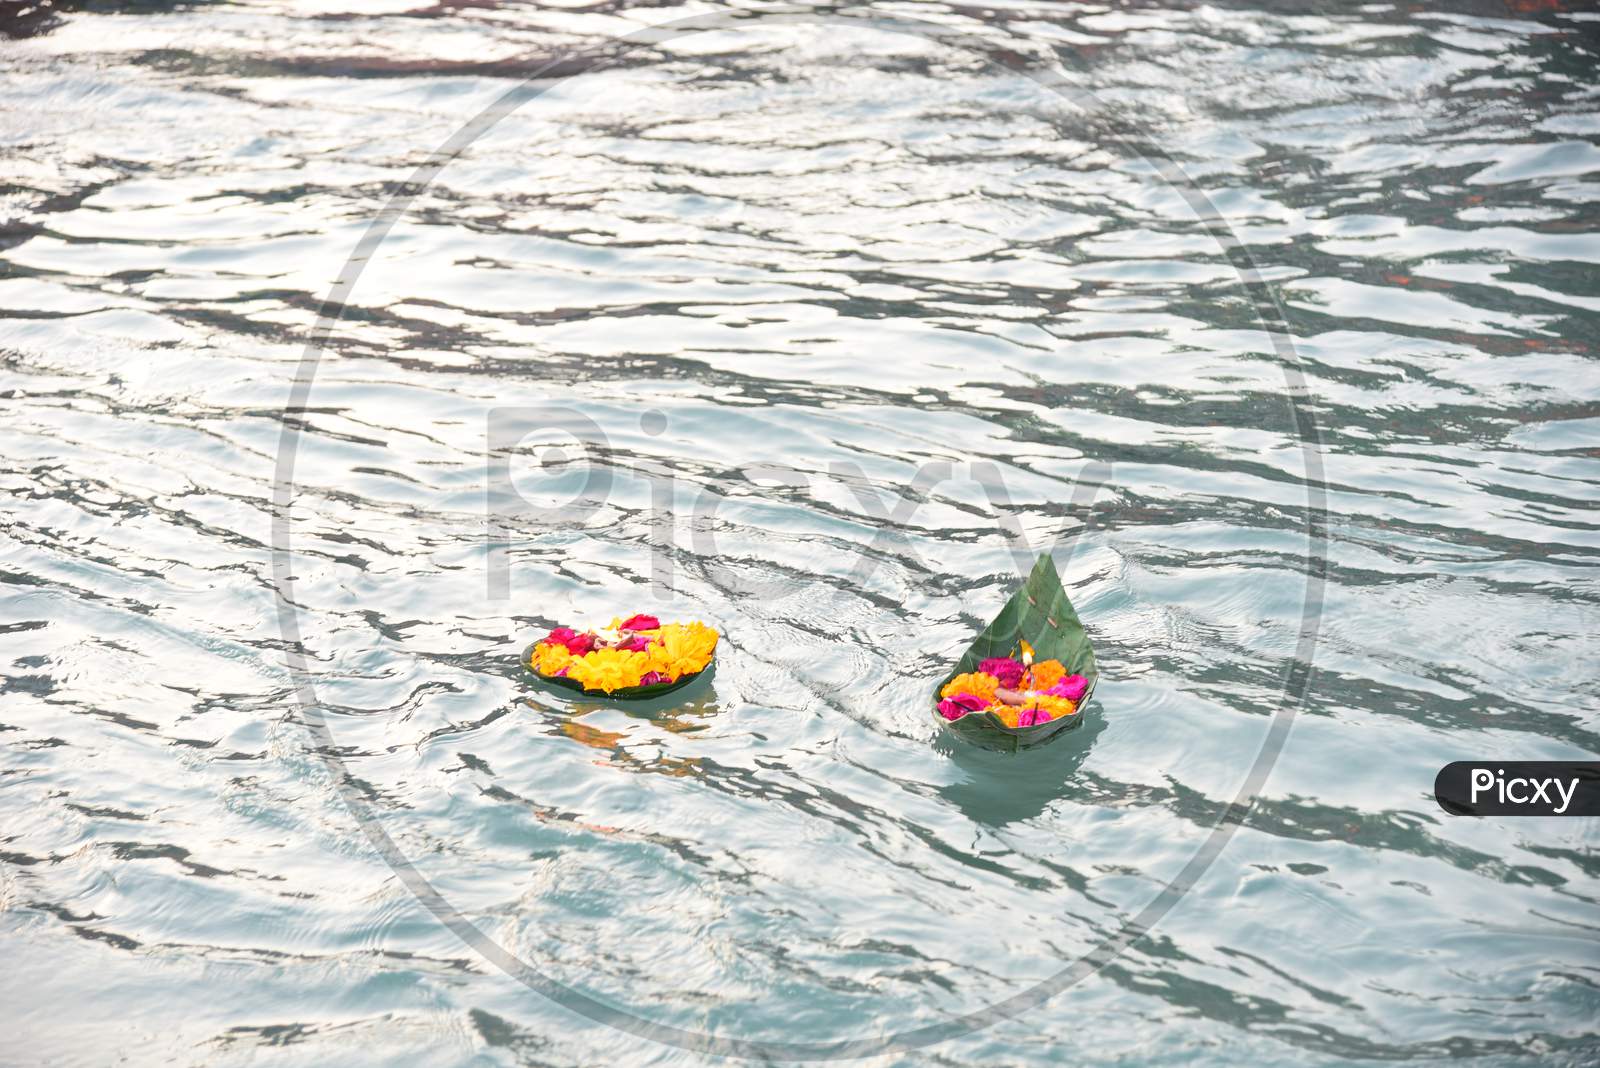 Pilgrims For Performing Pooja to Holy River Ganga and Leaving Flowers in Ganga Water